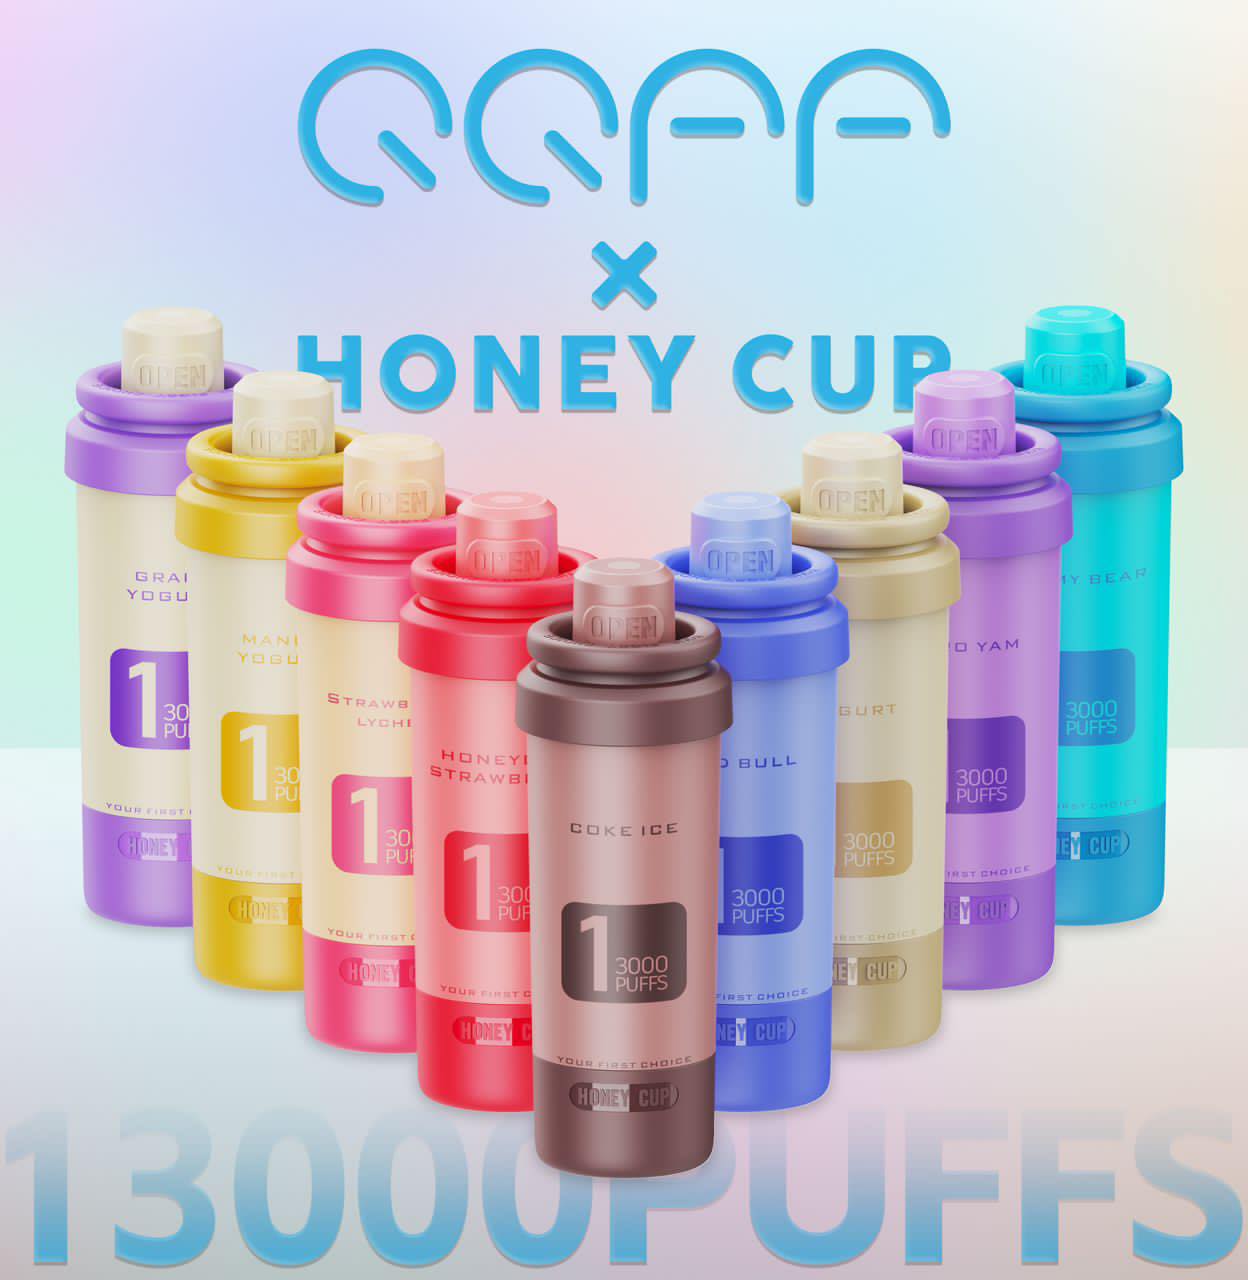 HONEY CUP 13000 RECHARGEABLE DISPOSABLE